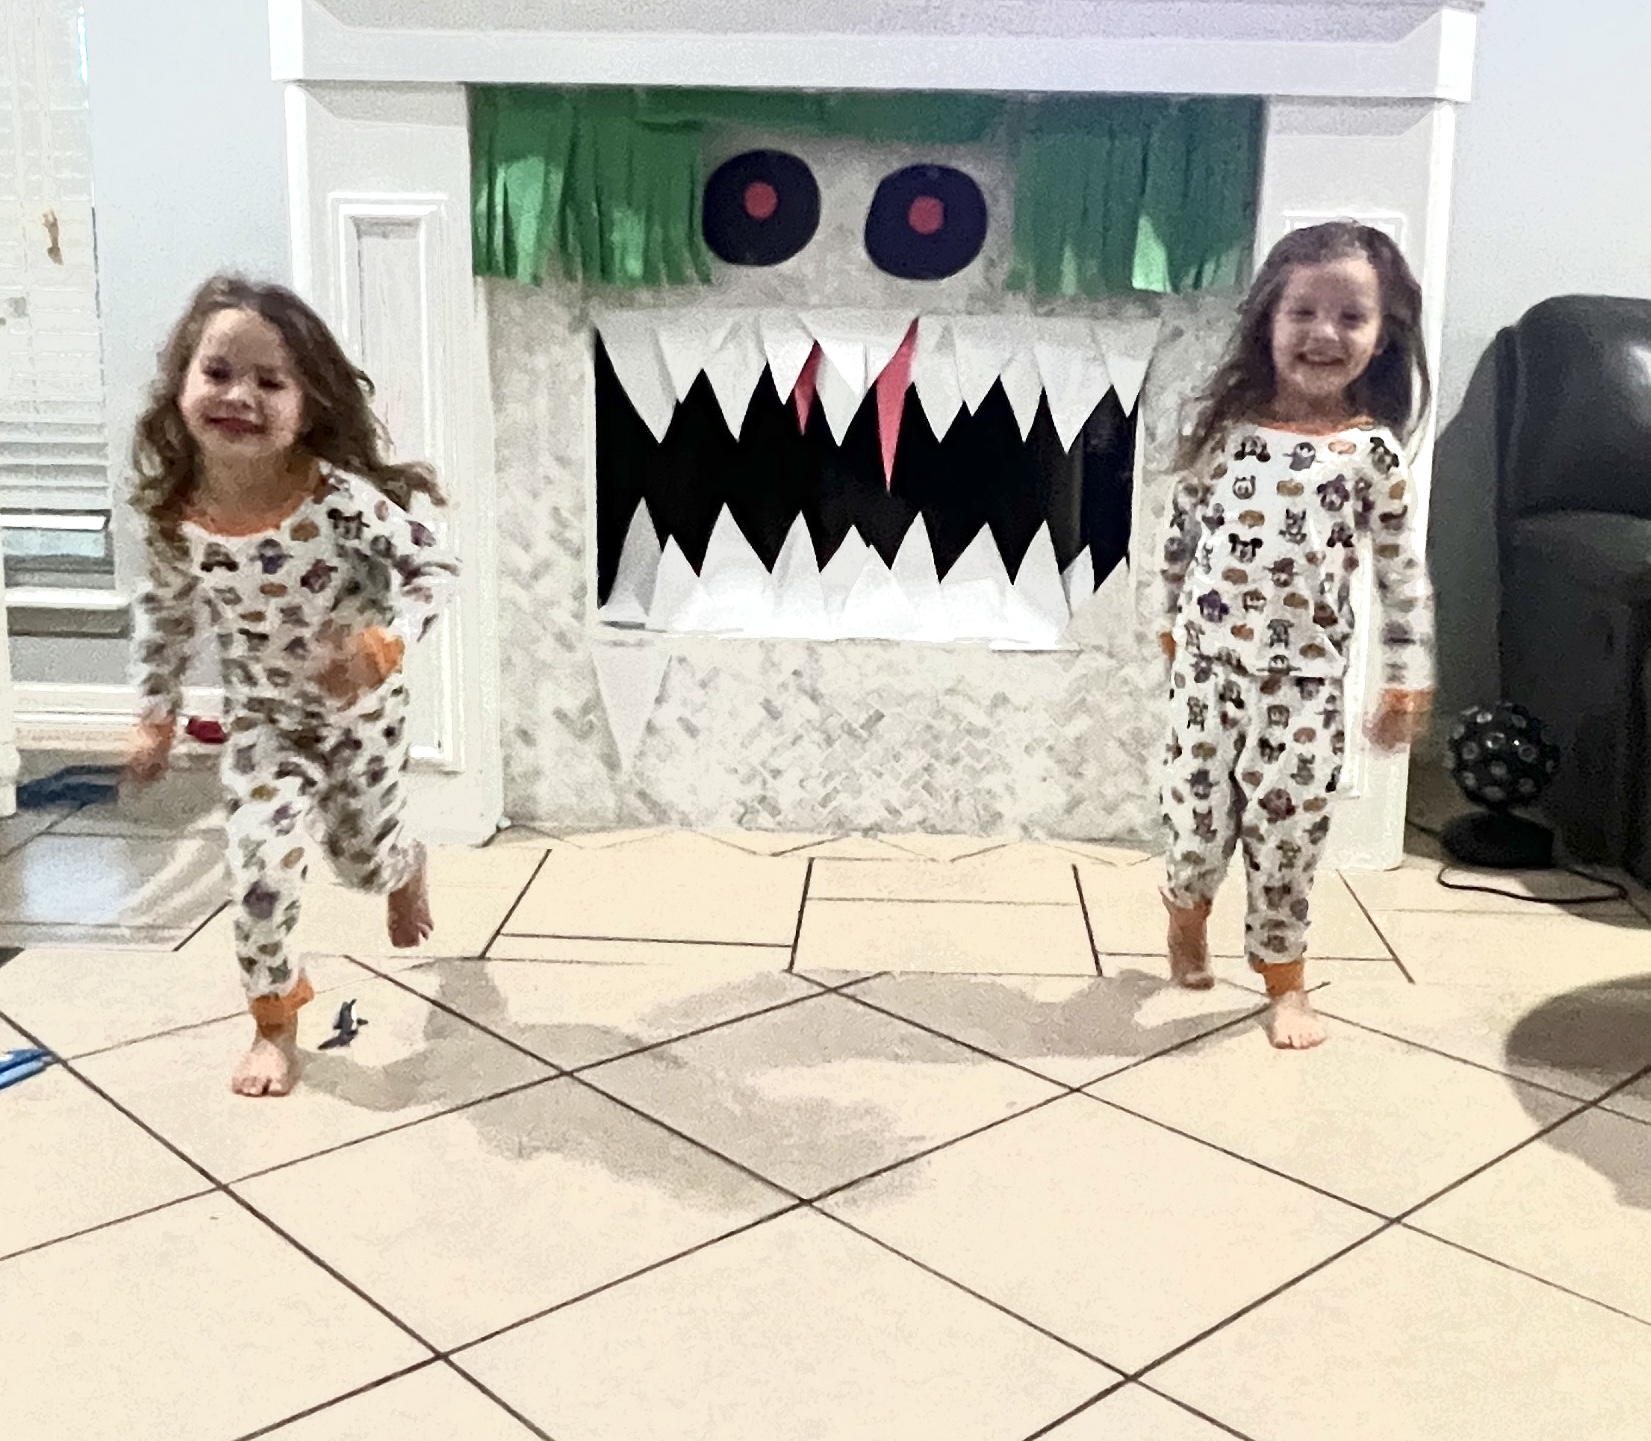 Boy Girl Twins in matching halloween pajamas, standing in front of a fireplace that has been transformed to look like a monster using paper to make green fringe hair, google eyes, and big white triangular fangs and teeth.